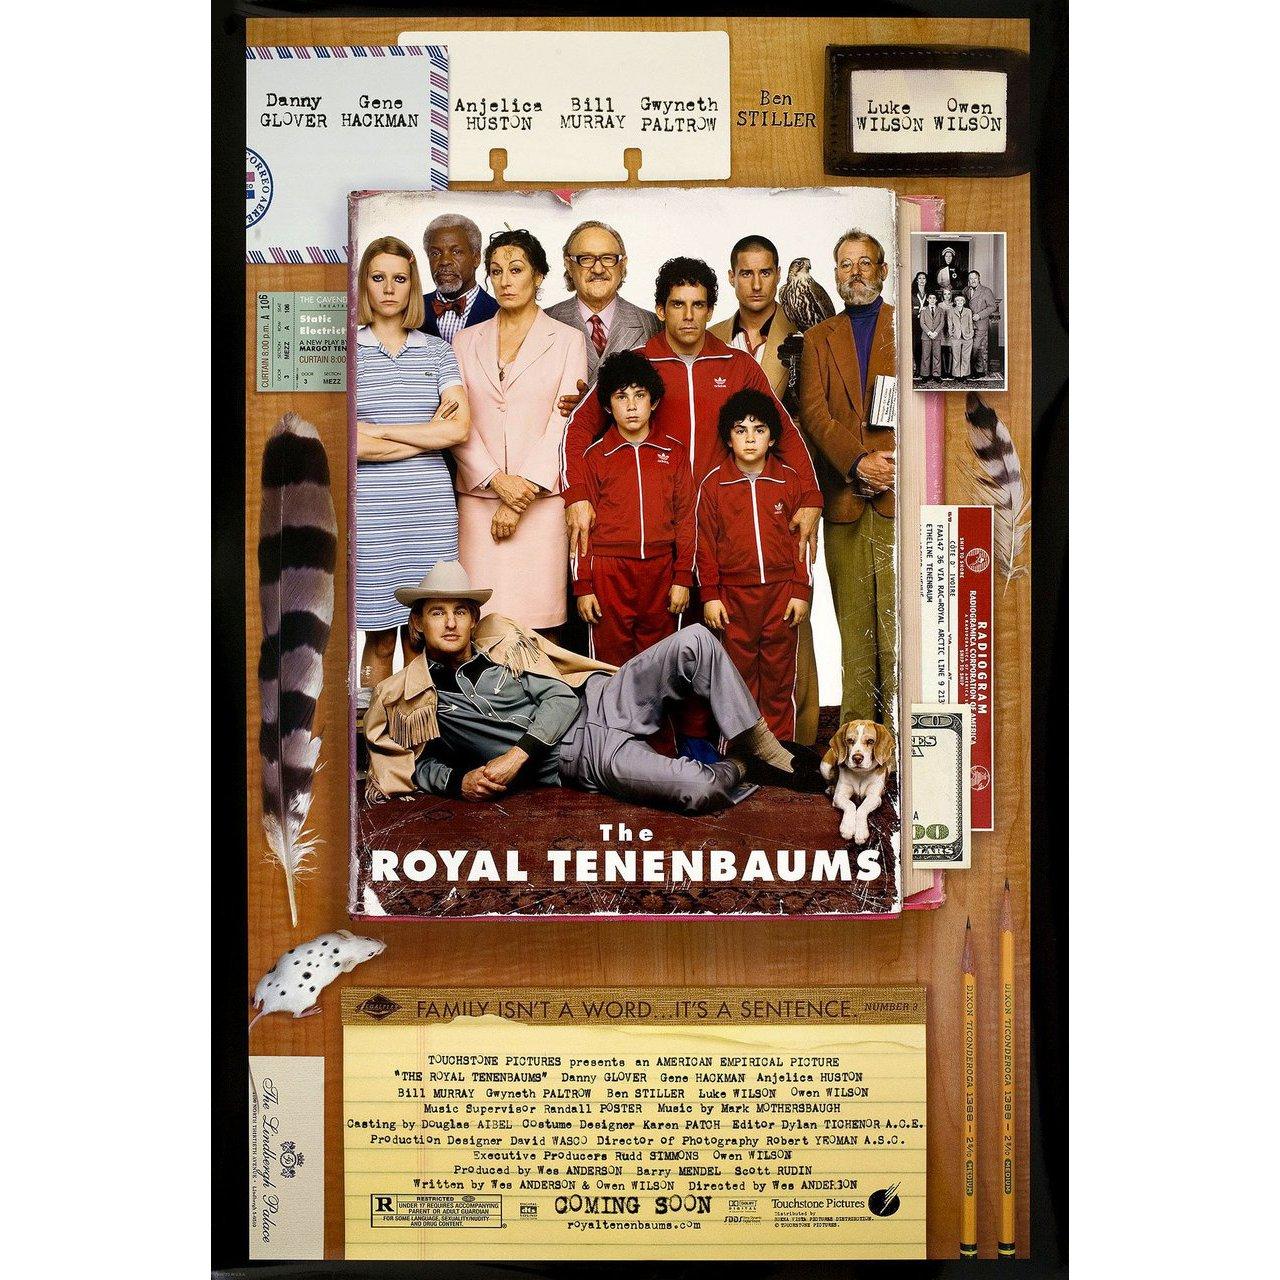 Original 2001 U.S. one sheet poster for the film “The Royal Tenenbaums” directed by Wes Anderson with Gene Hackman / Anjelica Huston / Ben Stiller / Gwyneth Paltrow. Very good-fine condition, rolled. Please note: the size is stated in inches and the